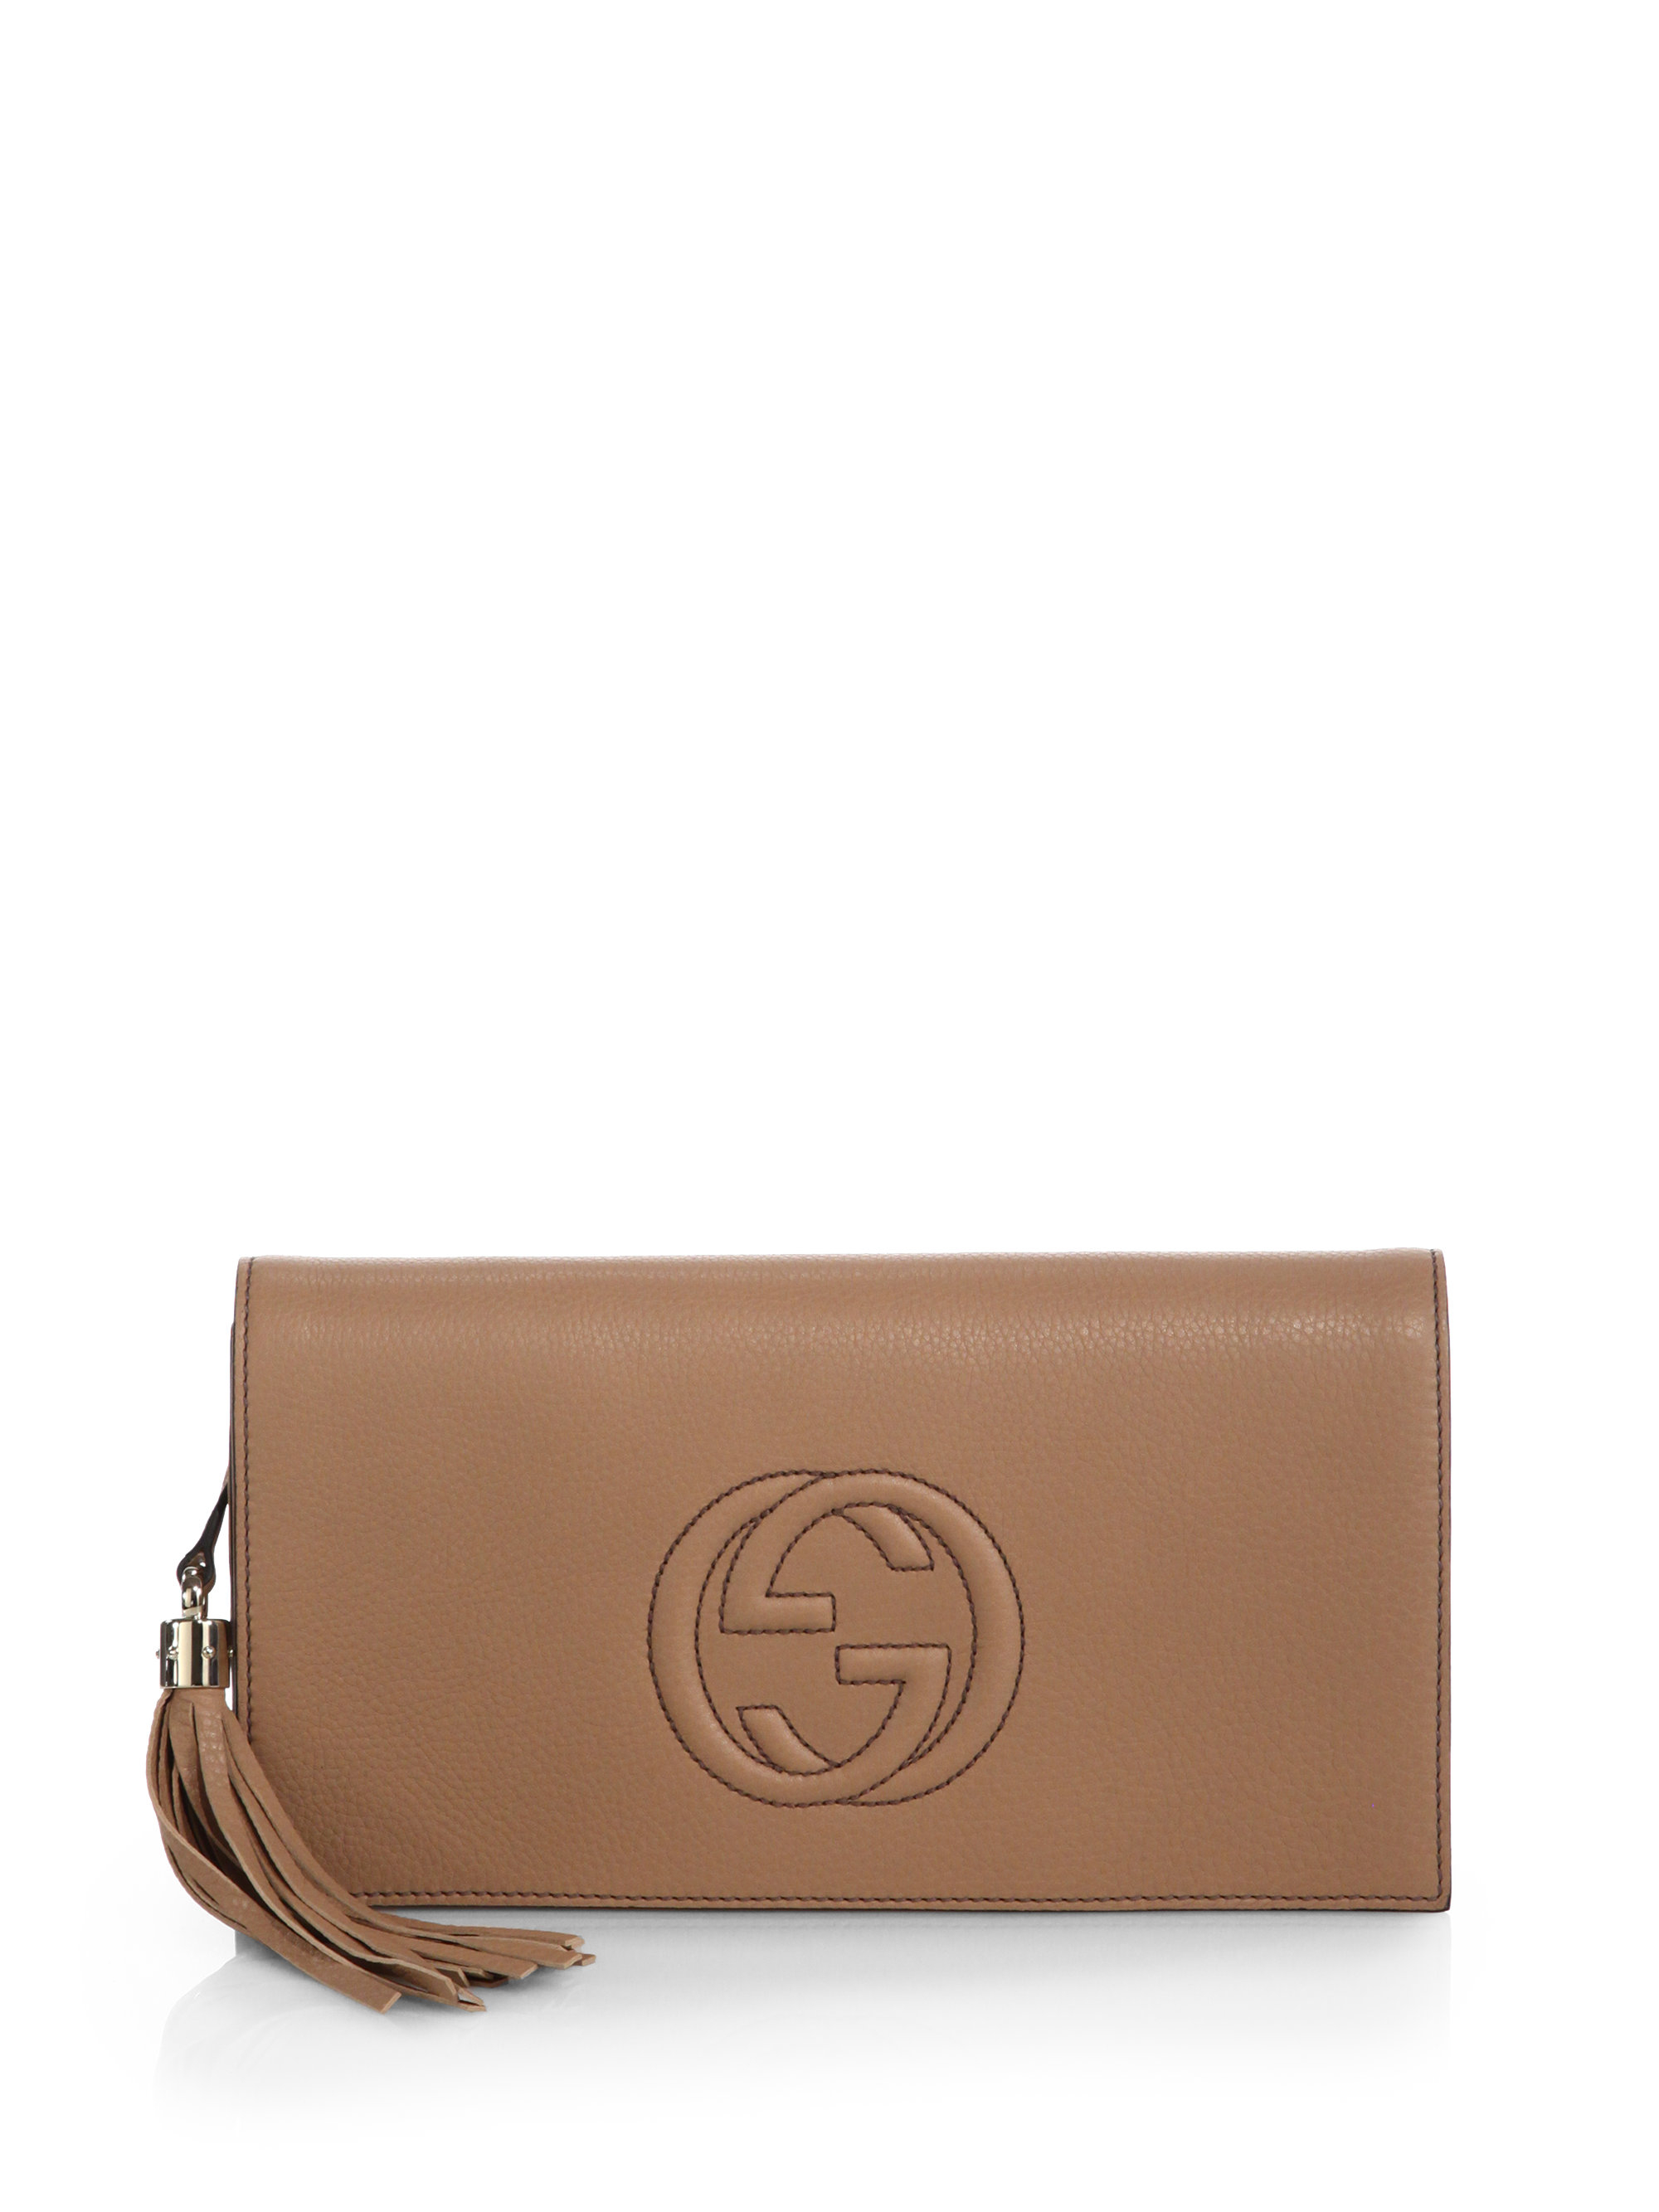 Gucci Soho Leather Clutch in Natural - Lyst